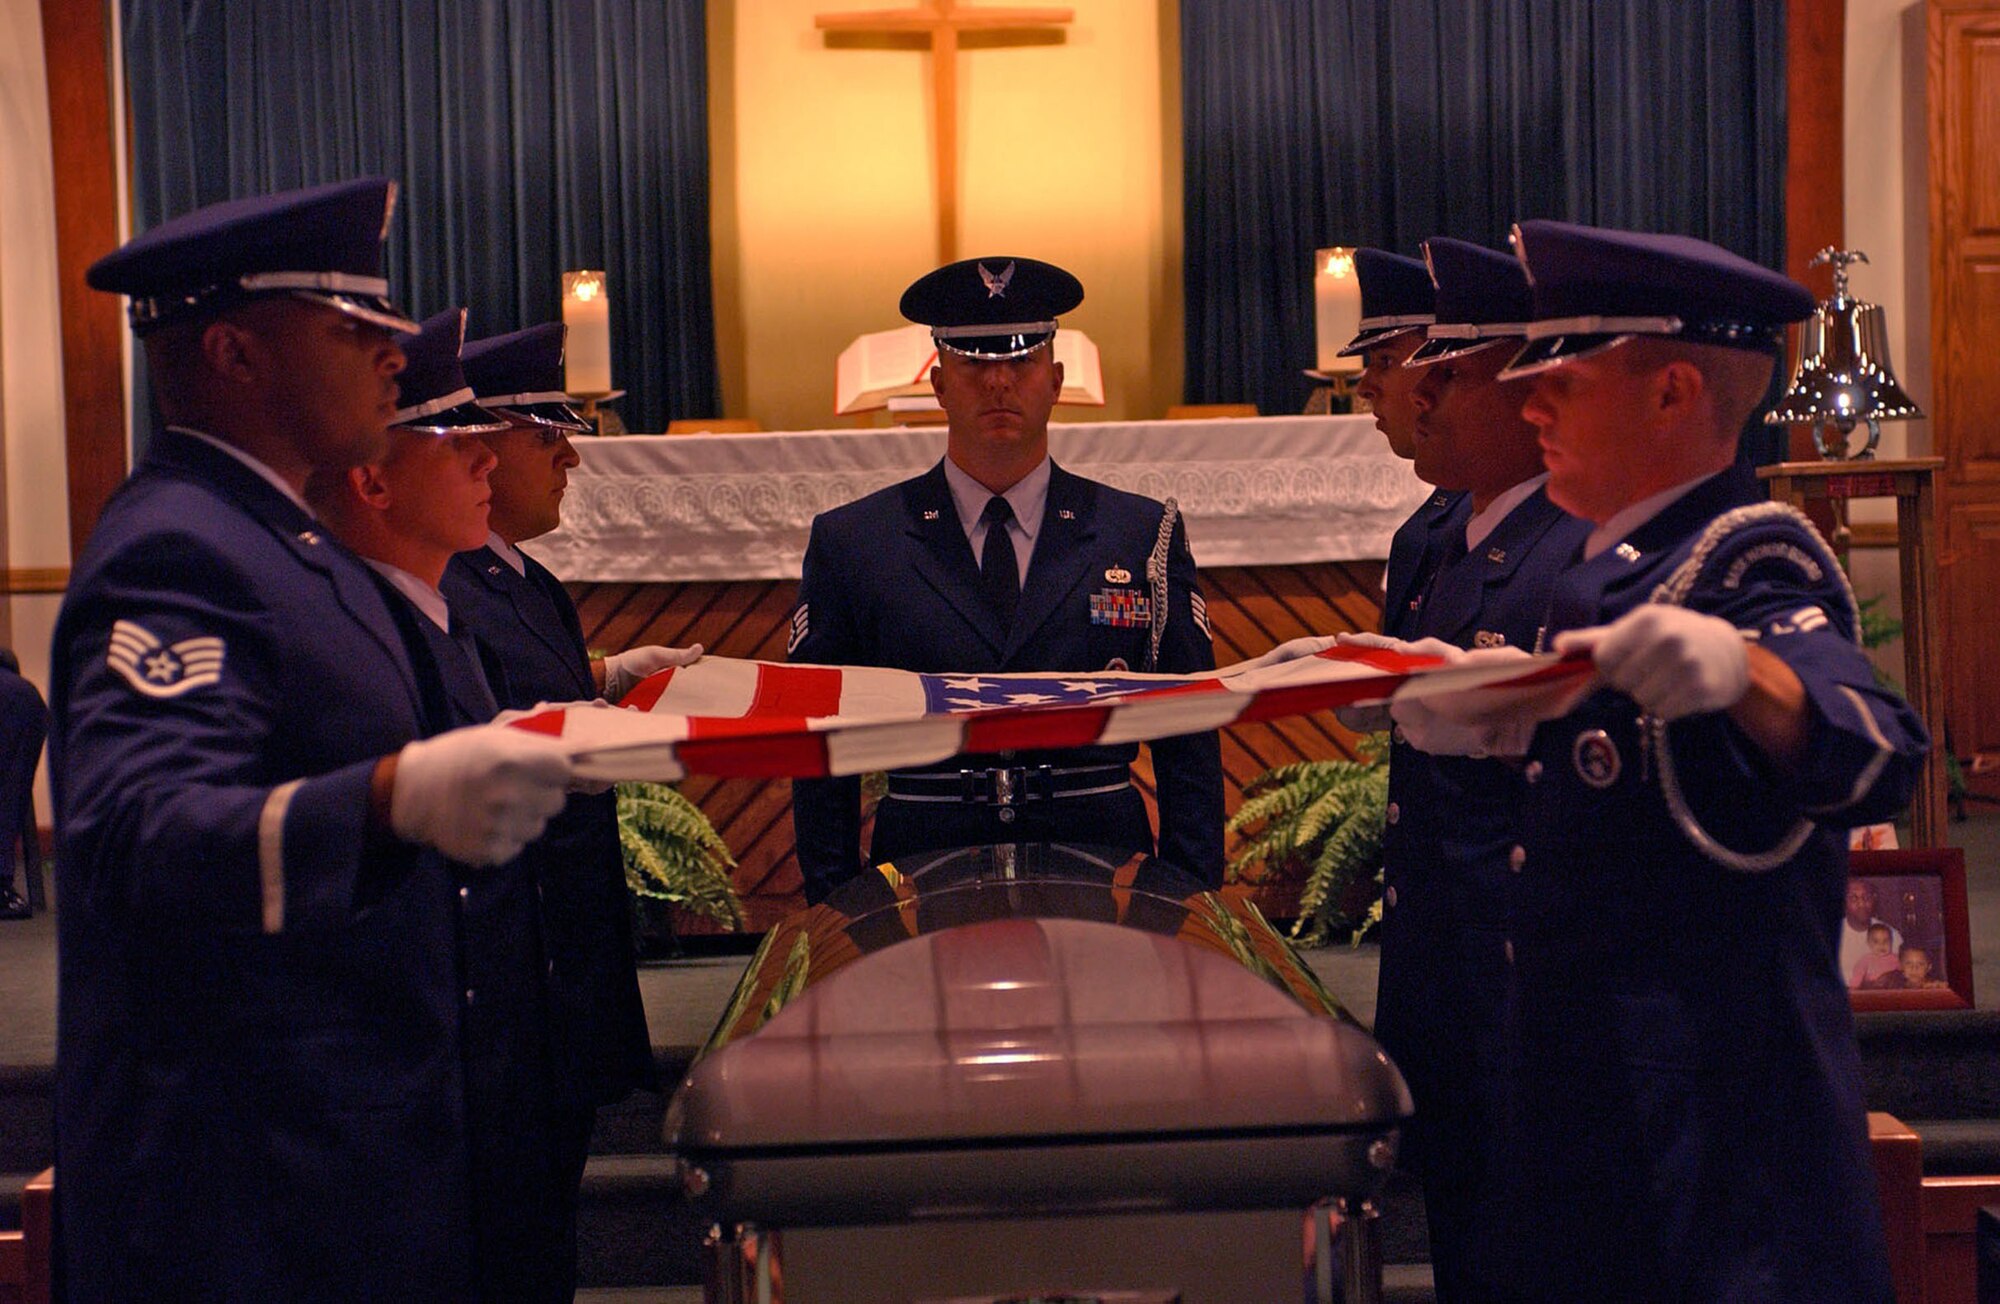 Members of the Hurlburt Field Honor Guard fold the flag over the casket of Tech. Sgt. Earnest  Rockamore, 16th Civil Engineer Squadron, during a memorial service here June 29. (U.S. Air Force Photograph by Senior Airman Kimberly Batts.)